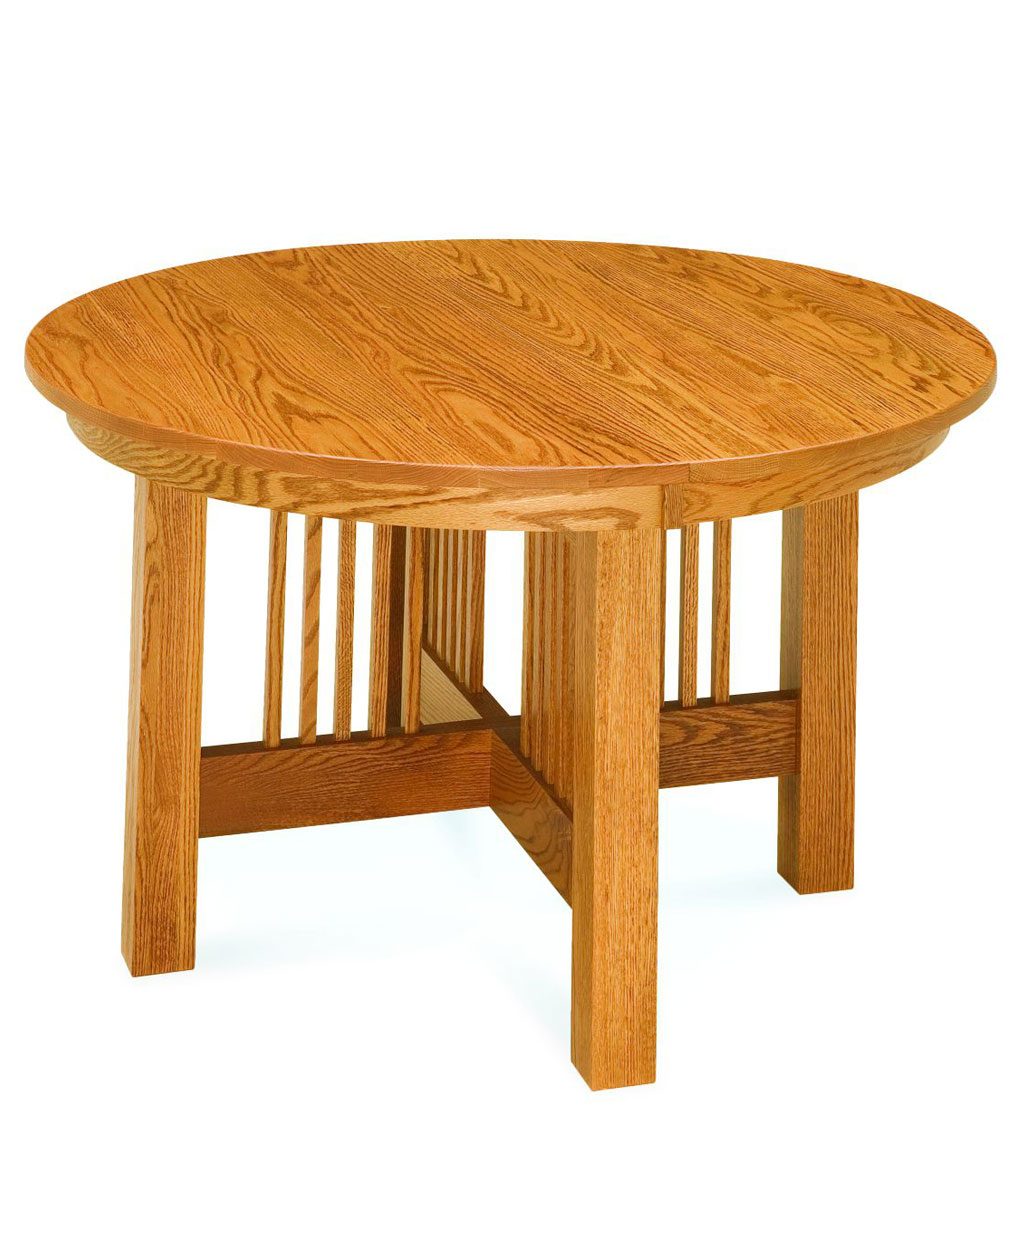 Craftsman Mission Amish Dining Table